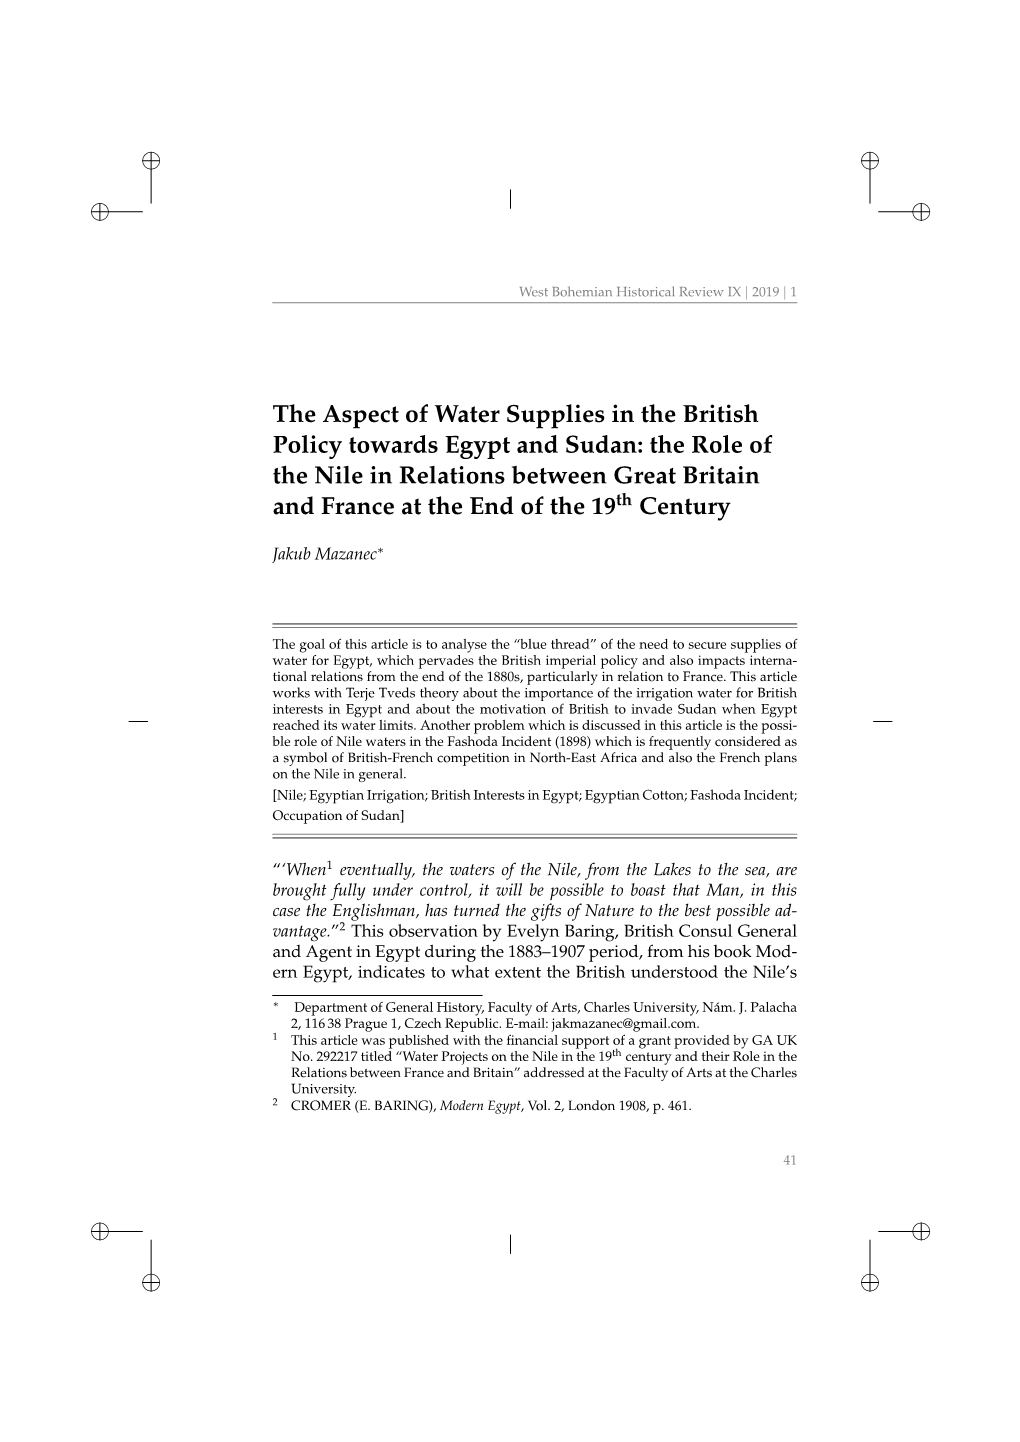 The Aspect of Water Supplies in the British Policy Towards Egypt and Sudan: the Role of the Nile in Relations Between Great Brit